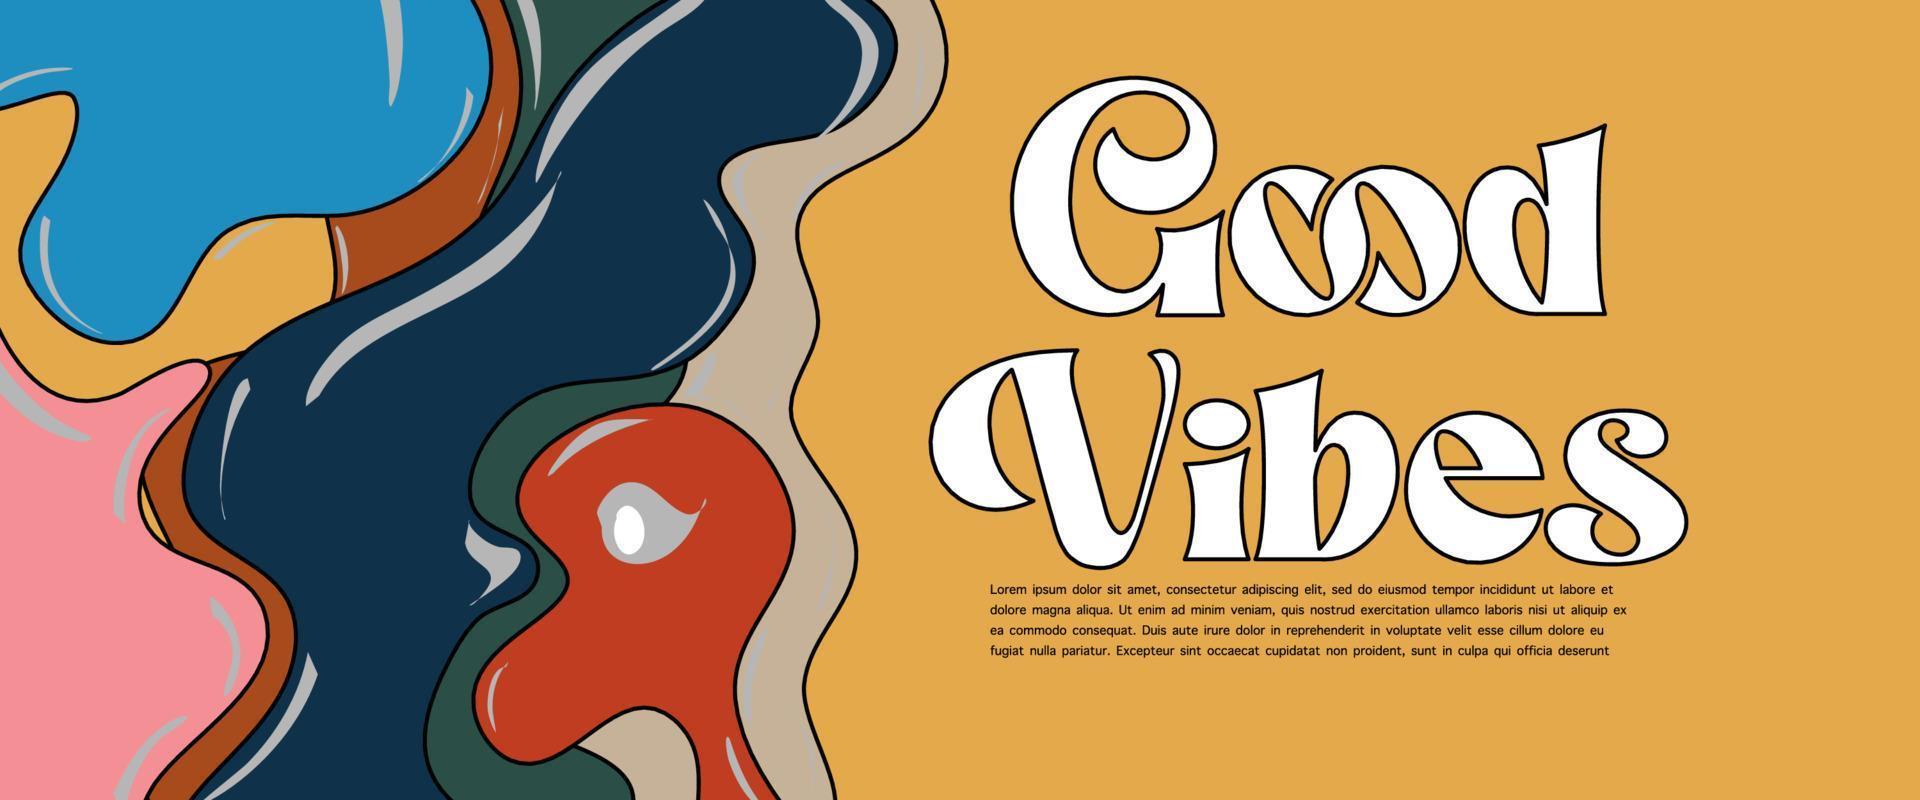 70s groovy retro good vibes only slogan with hippie swirl Pastel hand drawn psychedelic groovy background. vaporwave psychedelic style of the 80s - 90s. vector